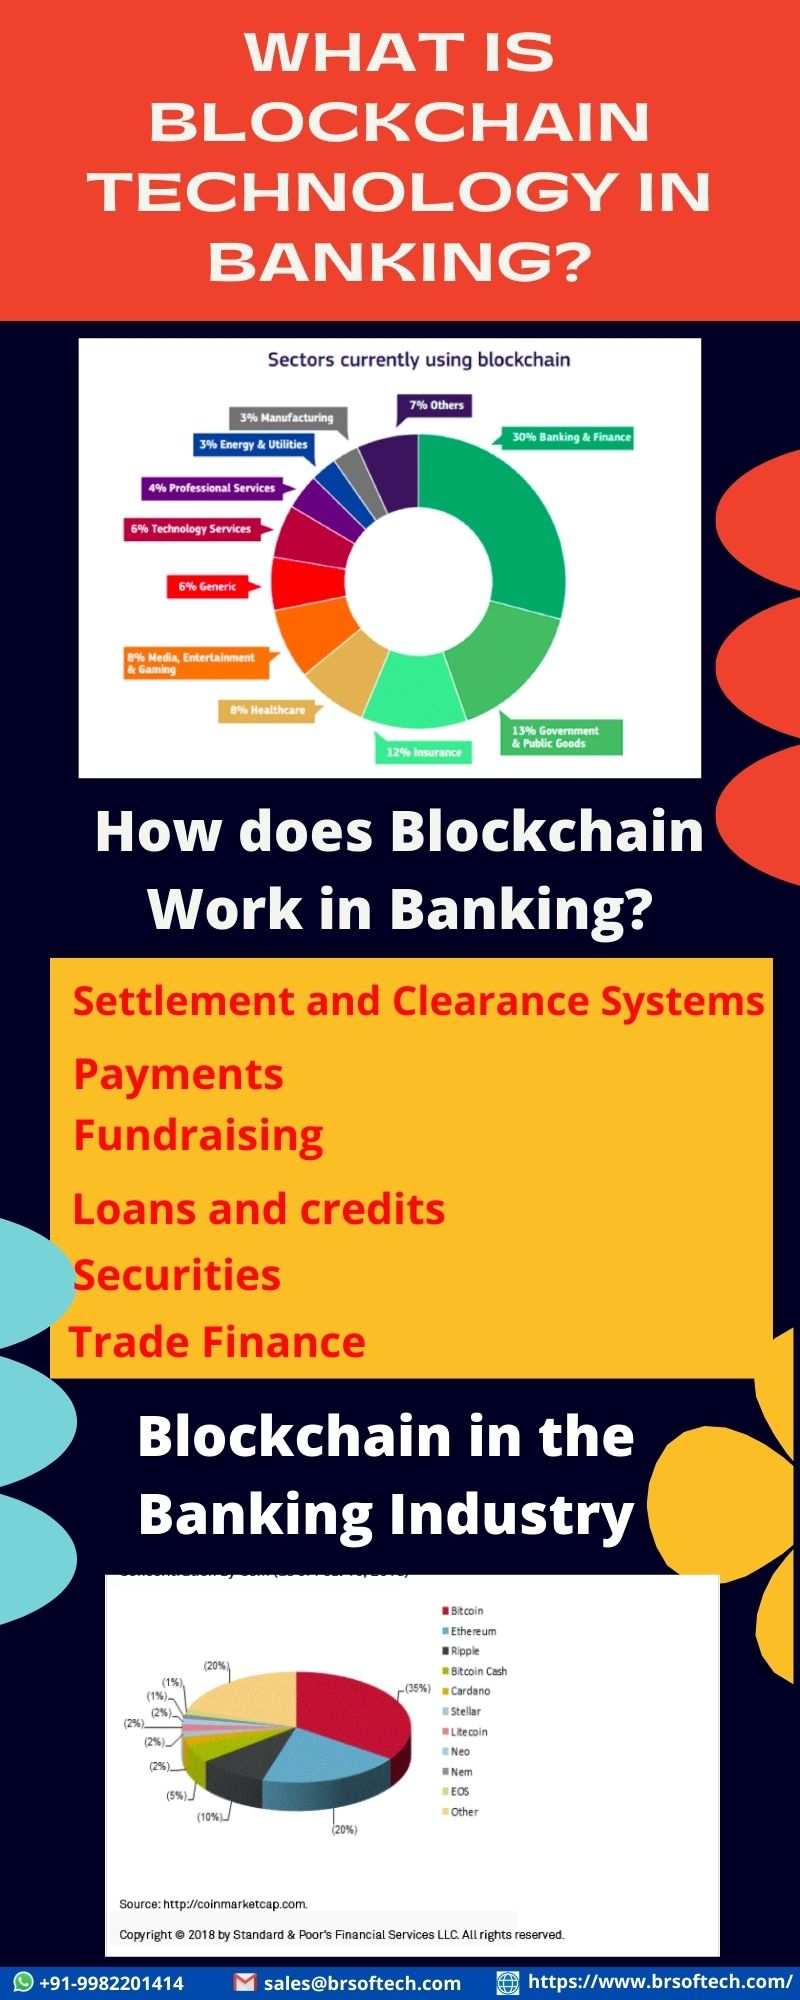 What is Blockchain Technology in Banking